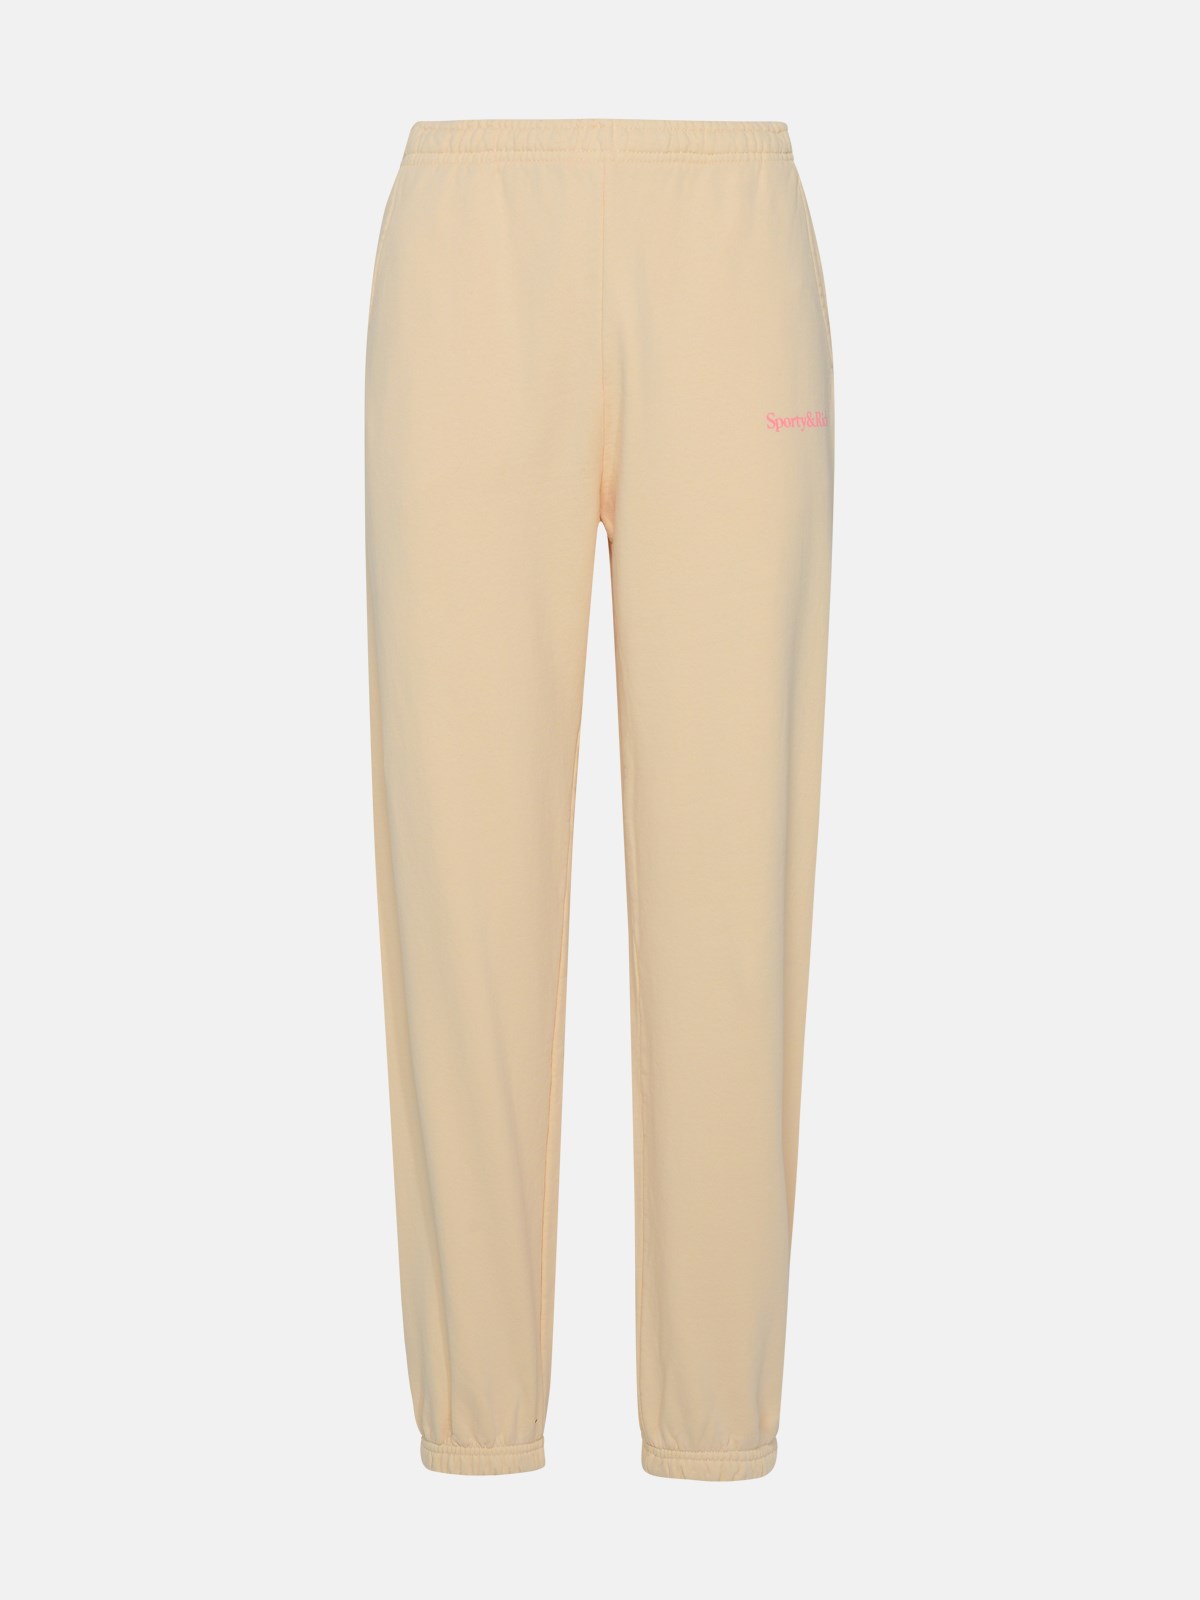 Sporty And Rich Cream Cotton Sporty Pants In Beige